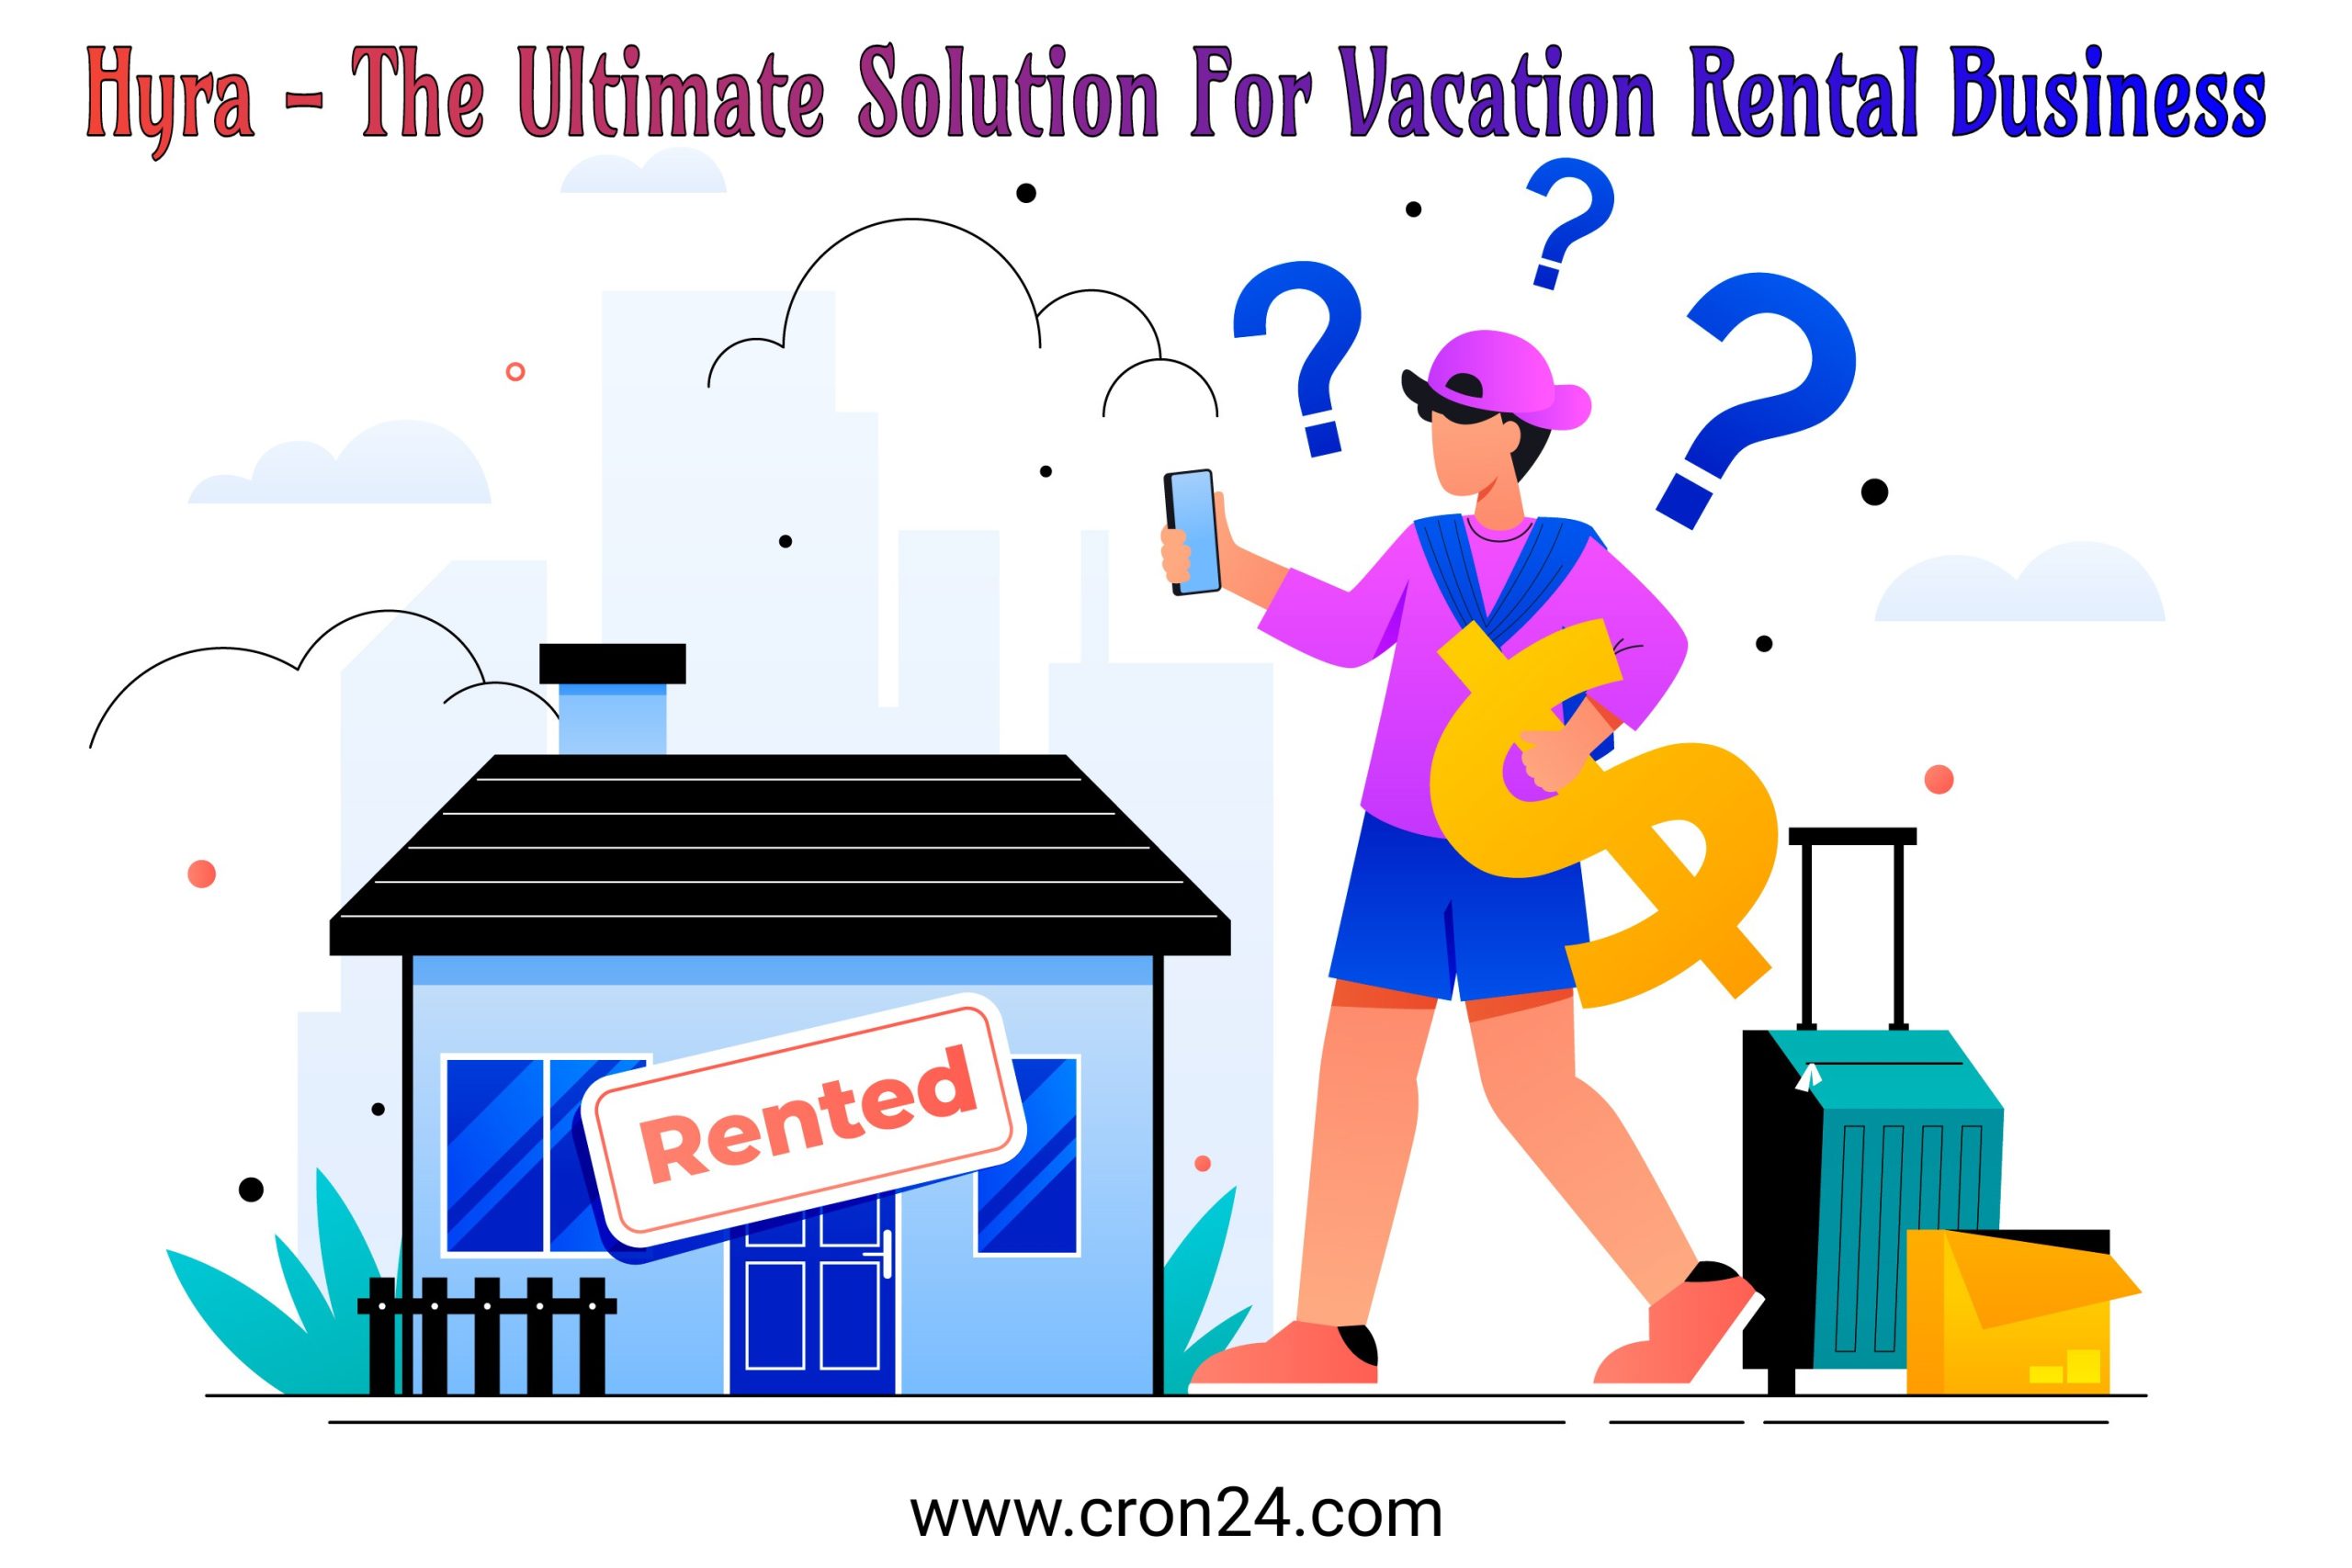 Hyra Airbnb Clone | The Ultimate Software Solution for Vacation Rental Business Success